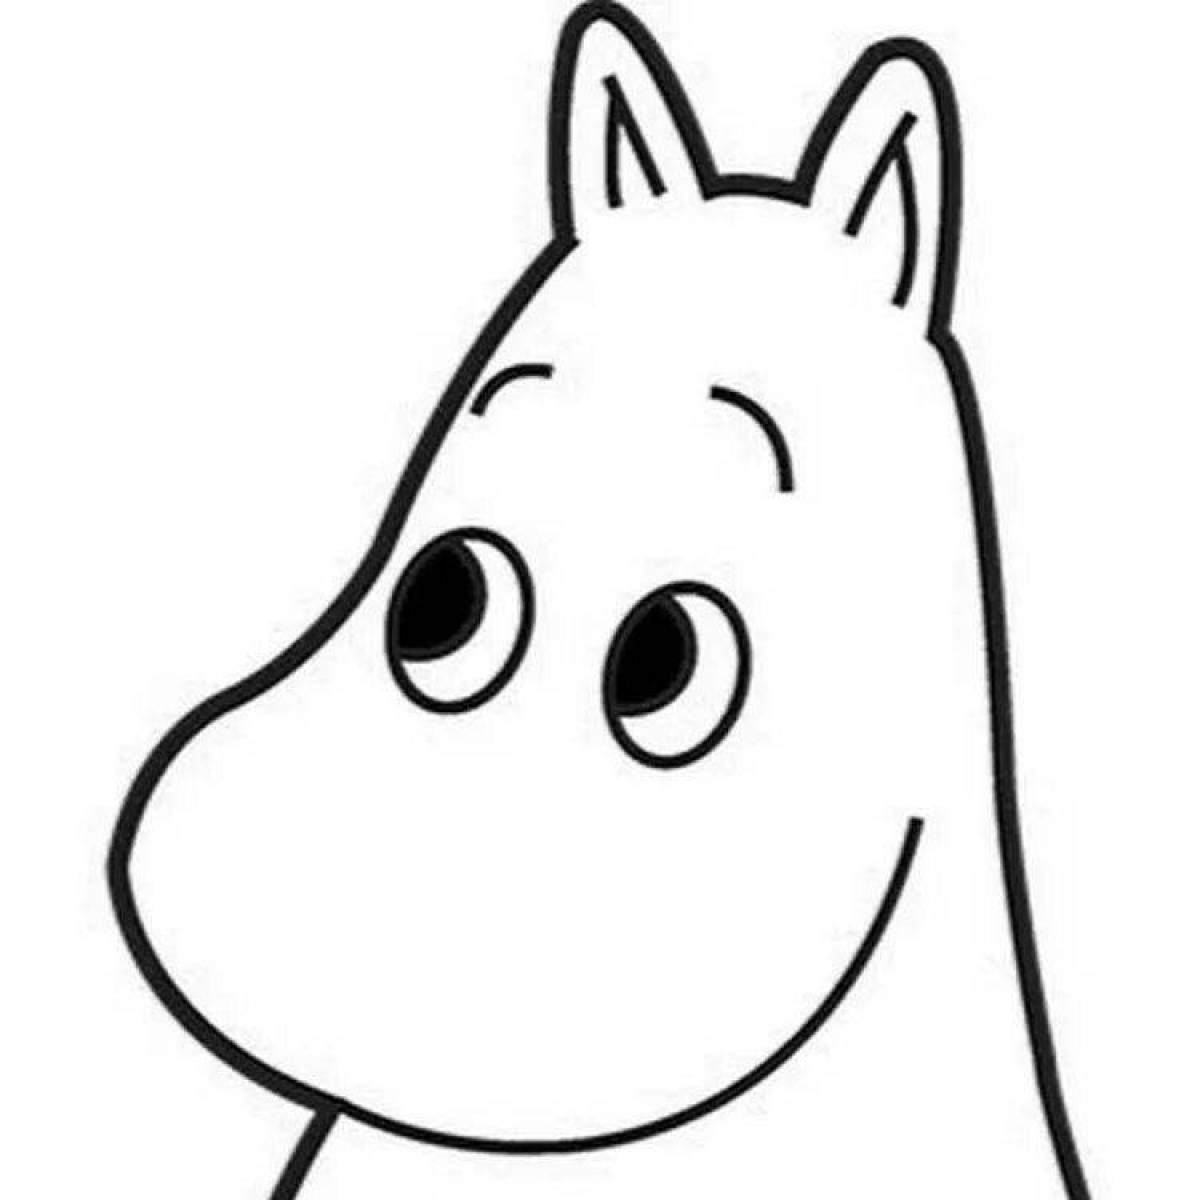 Coloring page Moomin trolls with colored splashes